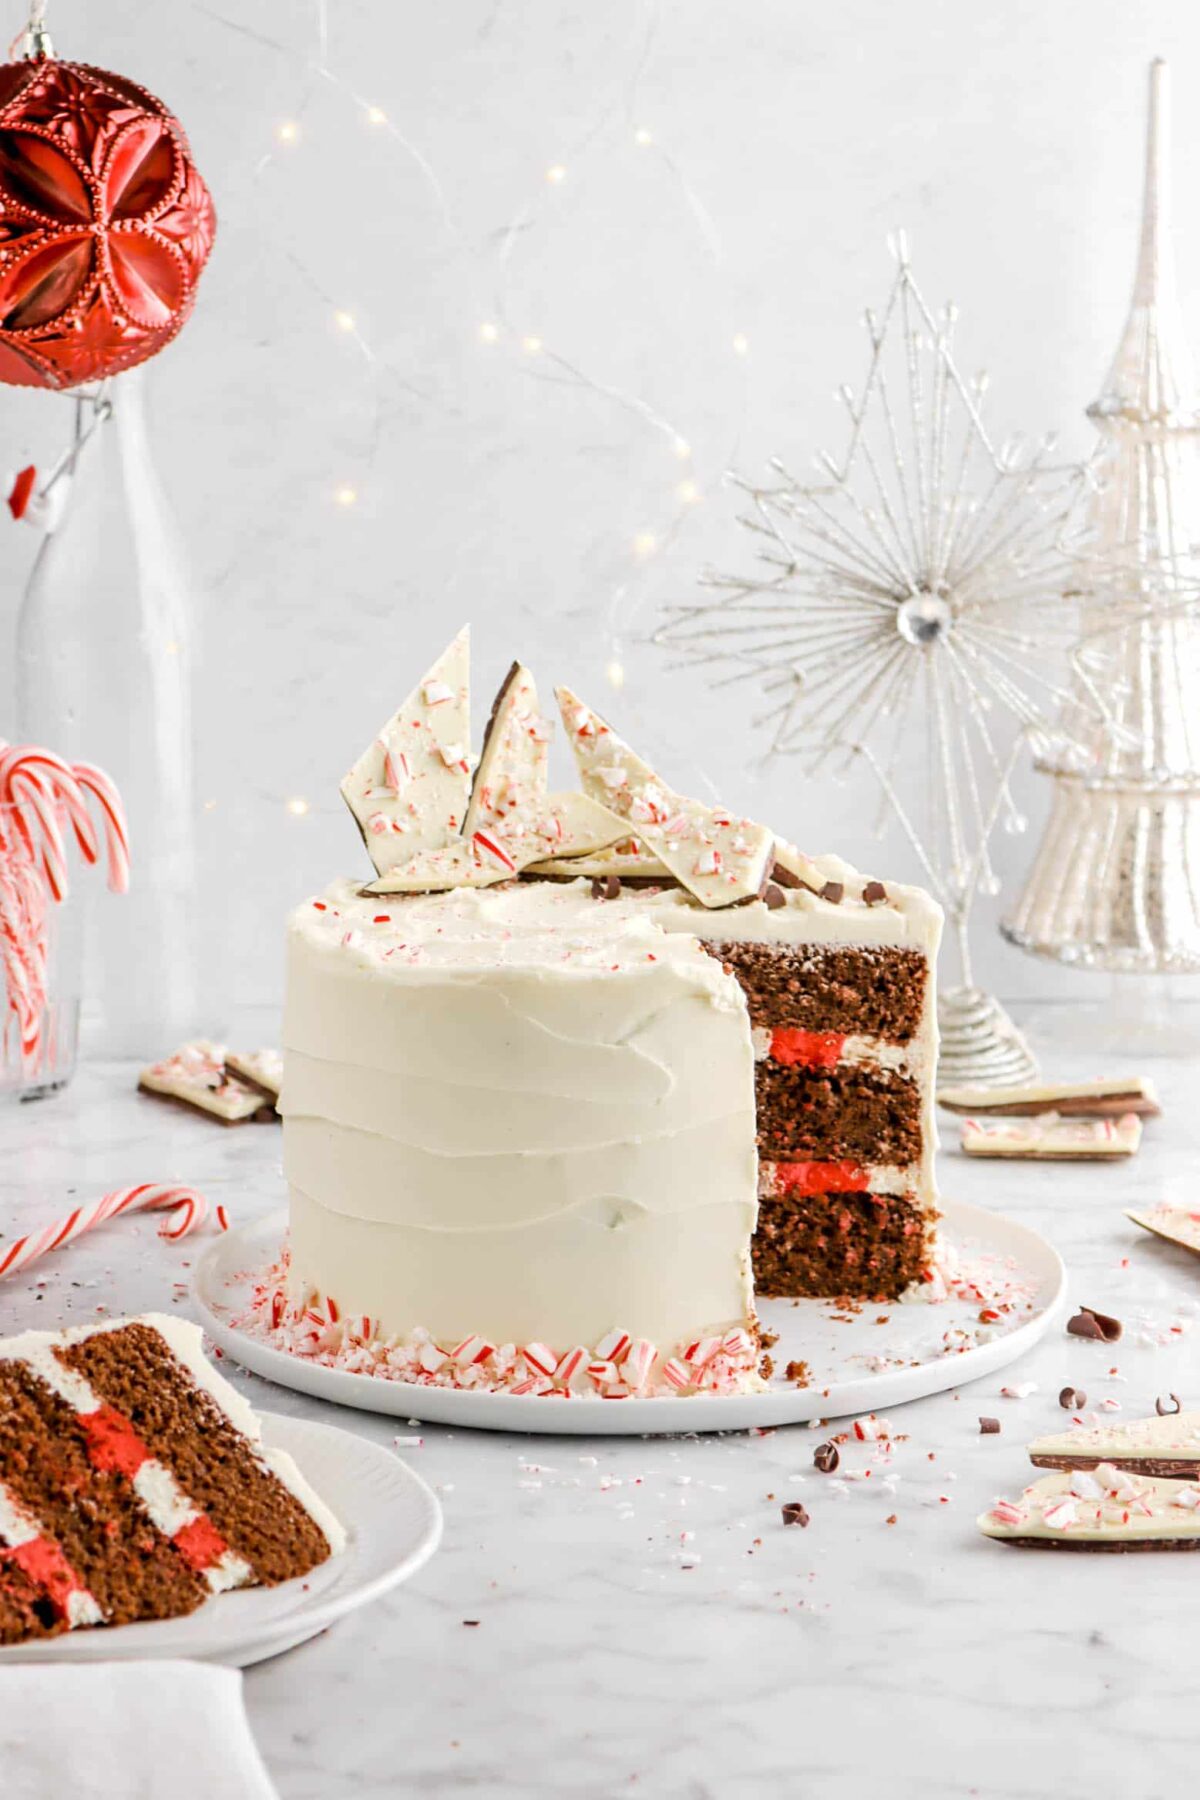 chocolate peppermint cake on white plat with slice on white plate in front of cake